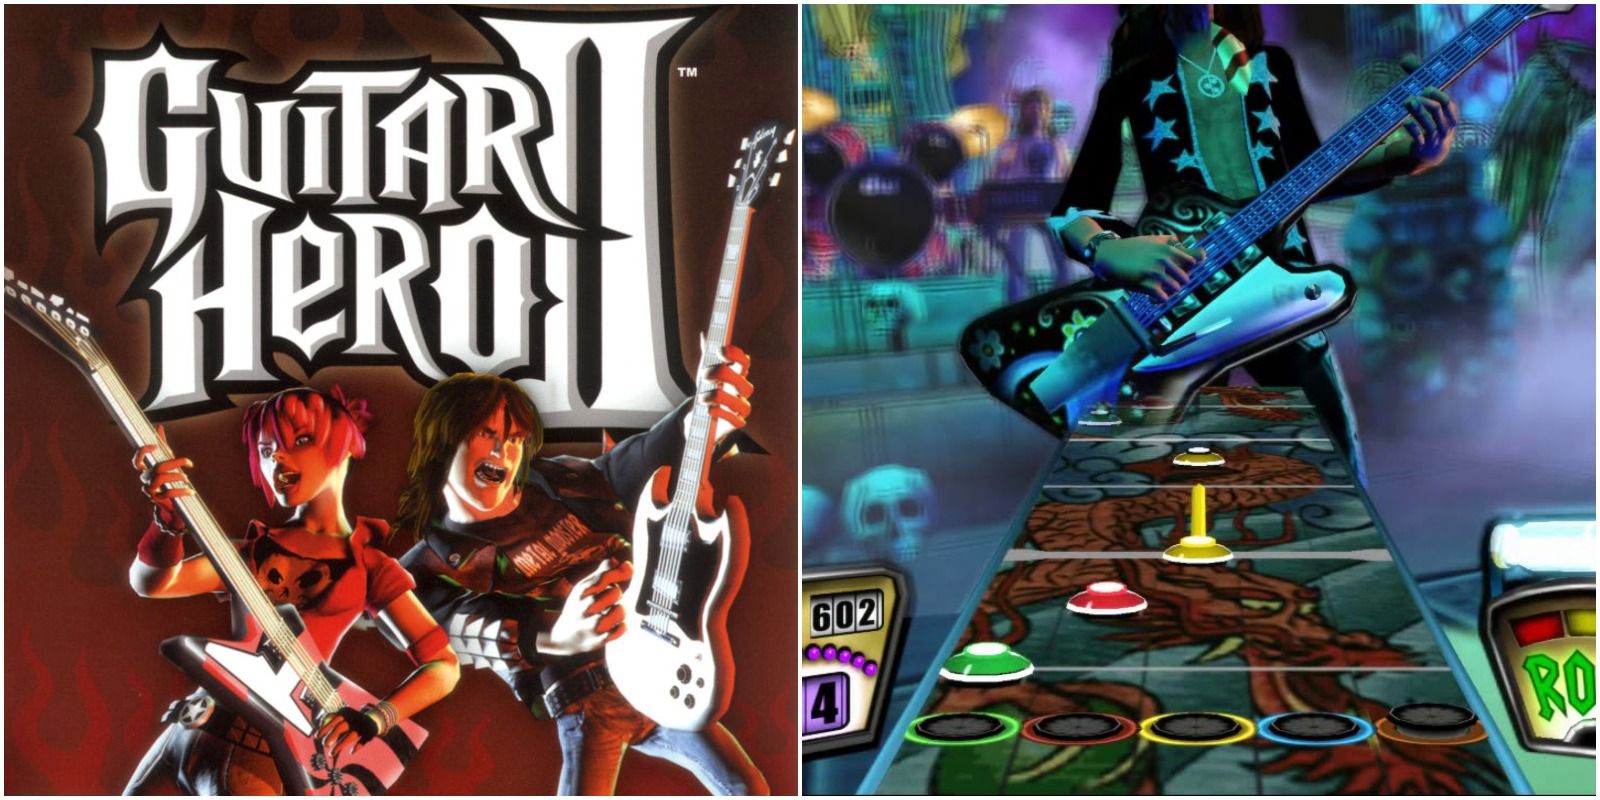 the game's cover art with 2 people player guitar and in game footage.